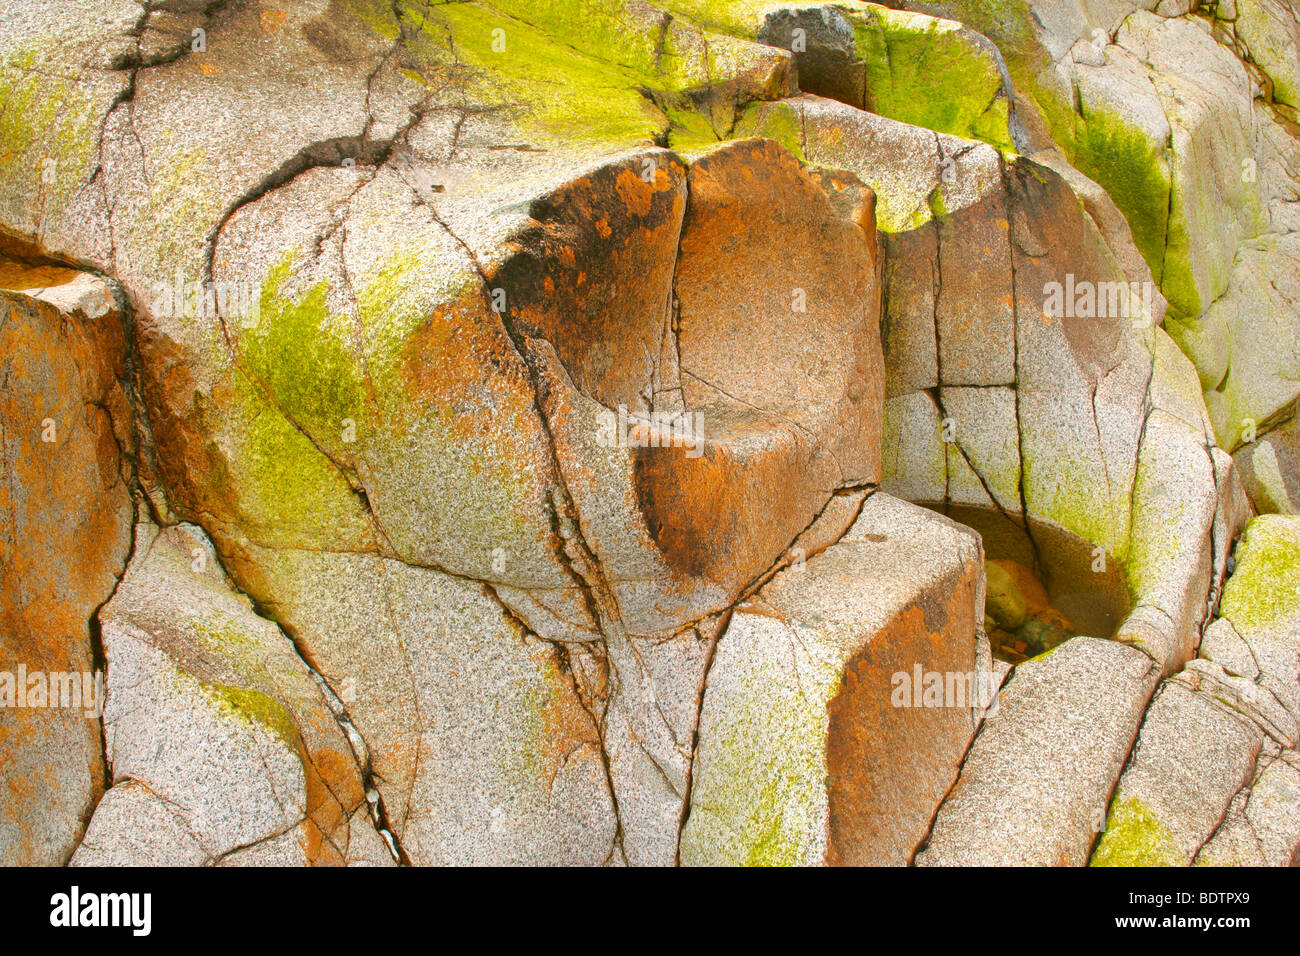 riverbed rocks covered with colourful algae and lichen in dried out riverbed Etive river, Glen Etive, Glencoe area, Highlands, S Stock Photo